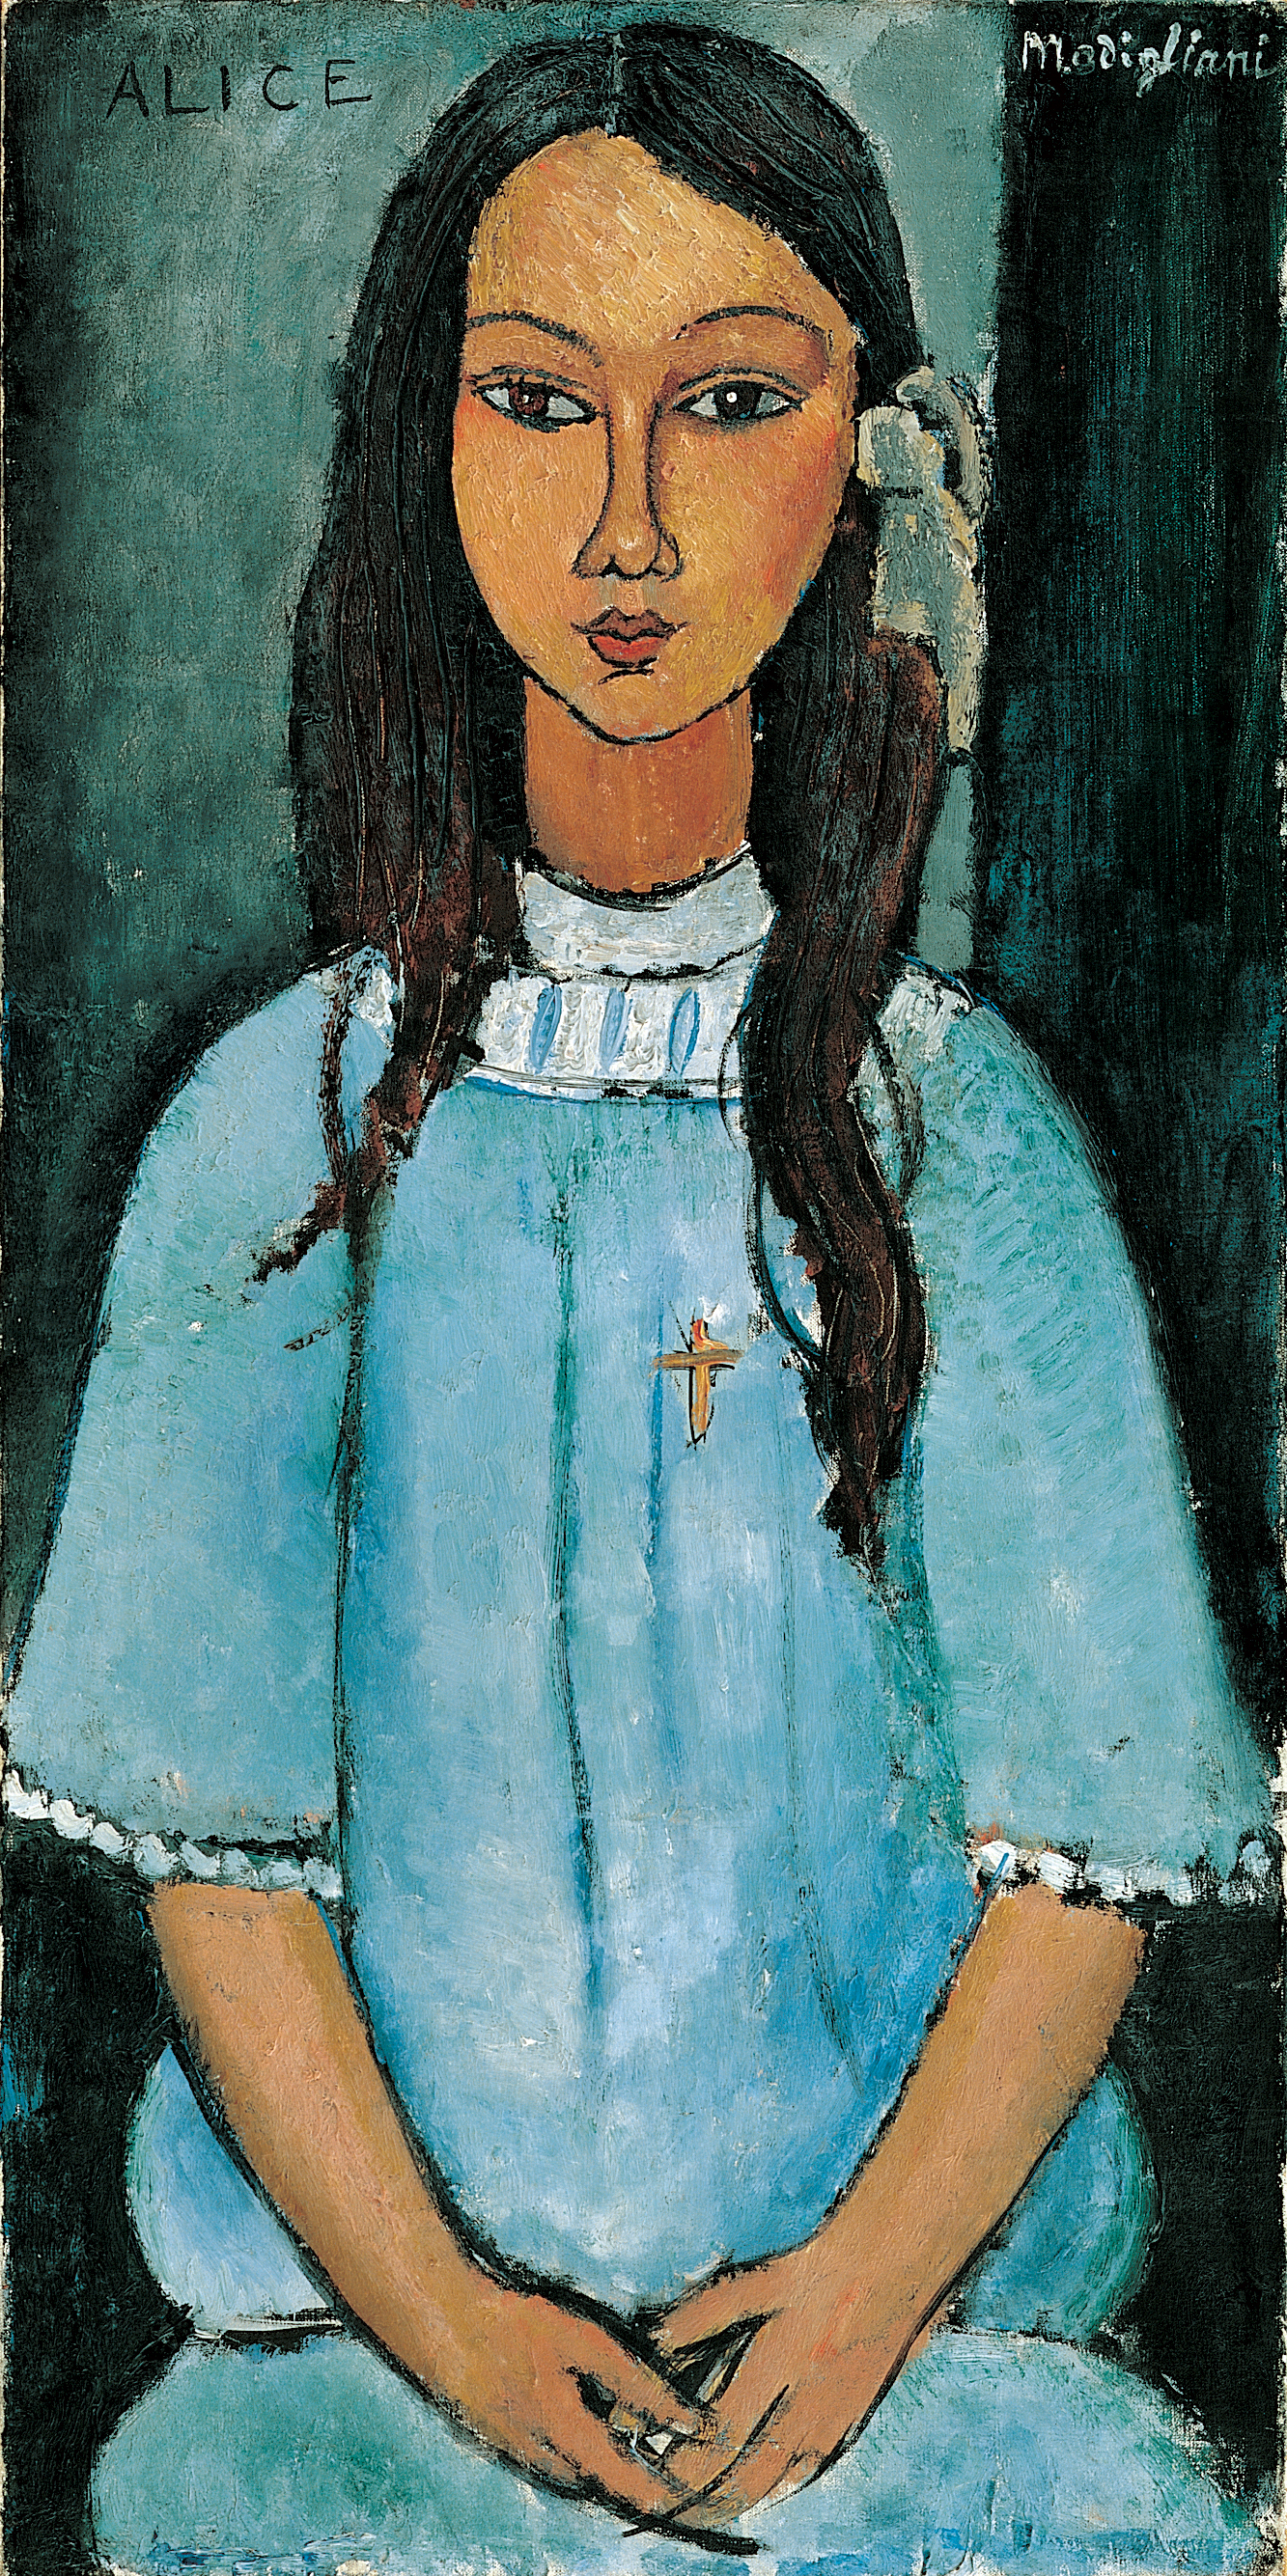 Alice by Amedeo Modigliani - 1918 - 39 x 78.5 cm Statens Museum for Kunst